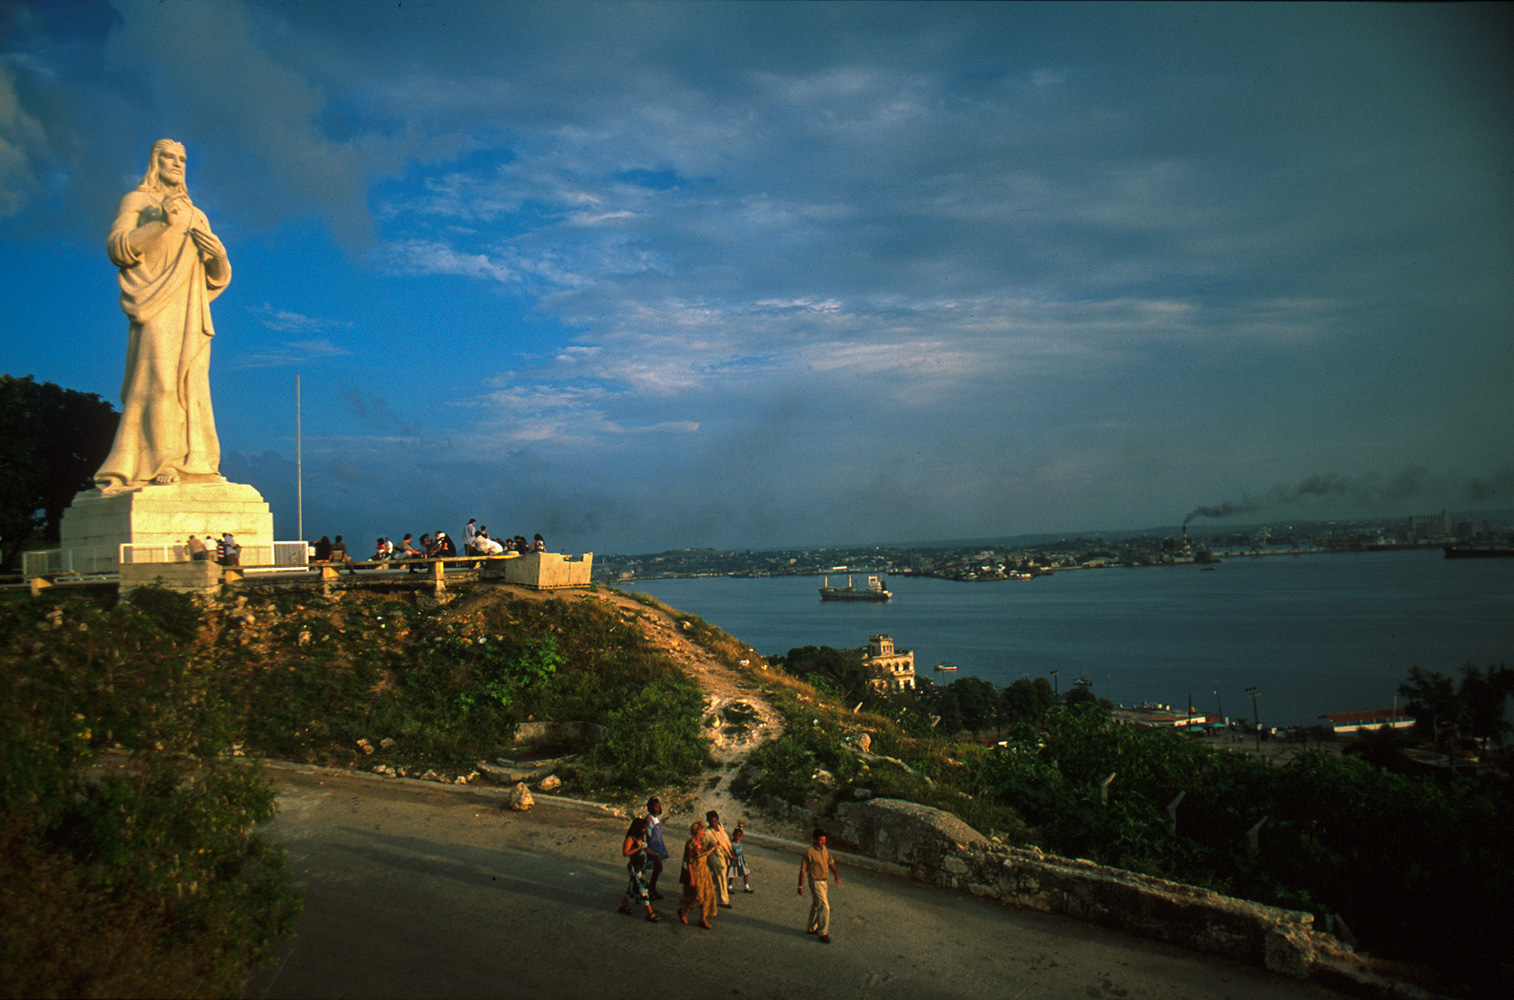 This huge statue stands sentinel, watching over the harbour and city of Havana.Nikon FM2, 24mm, Fuji Velvia